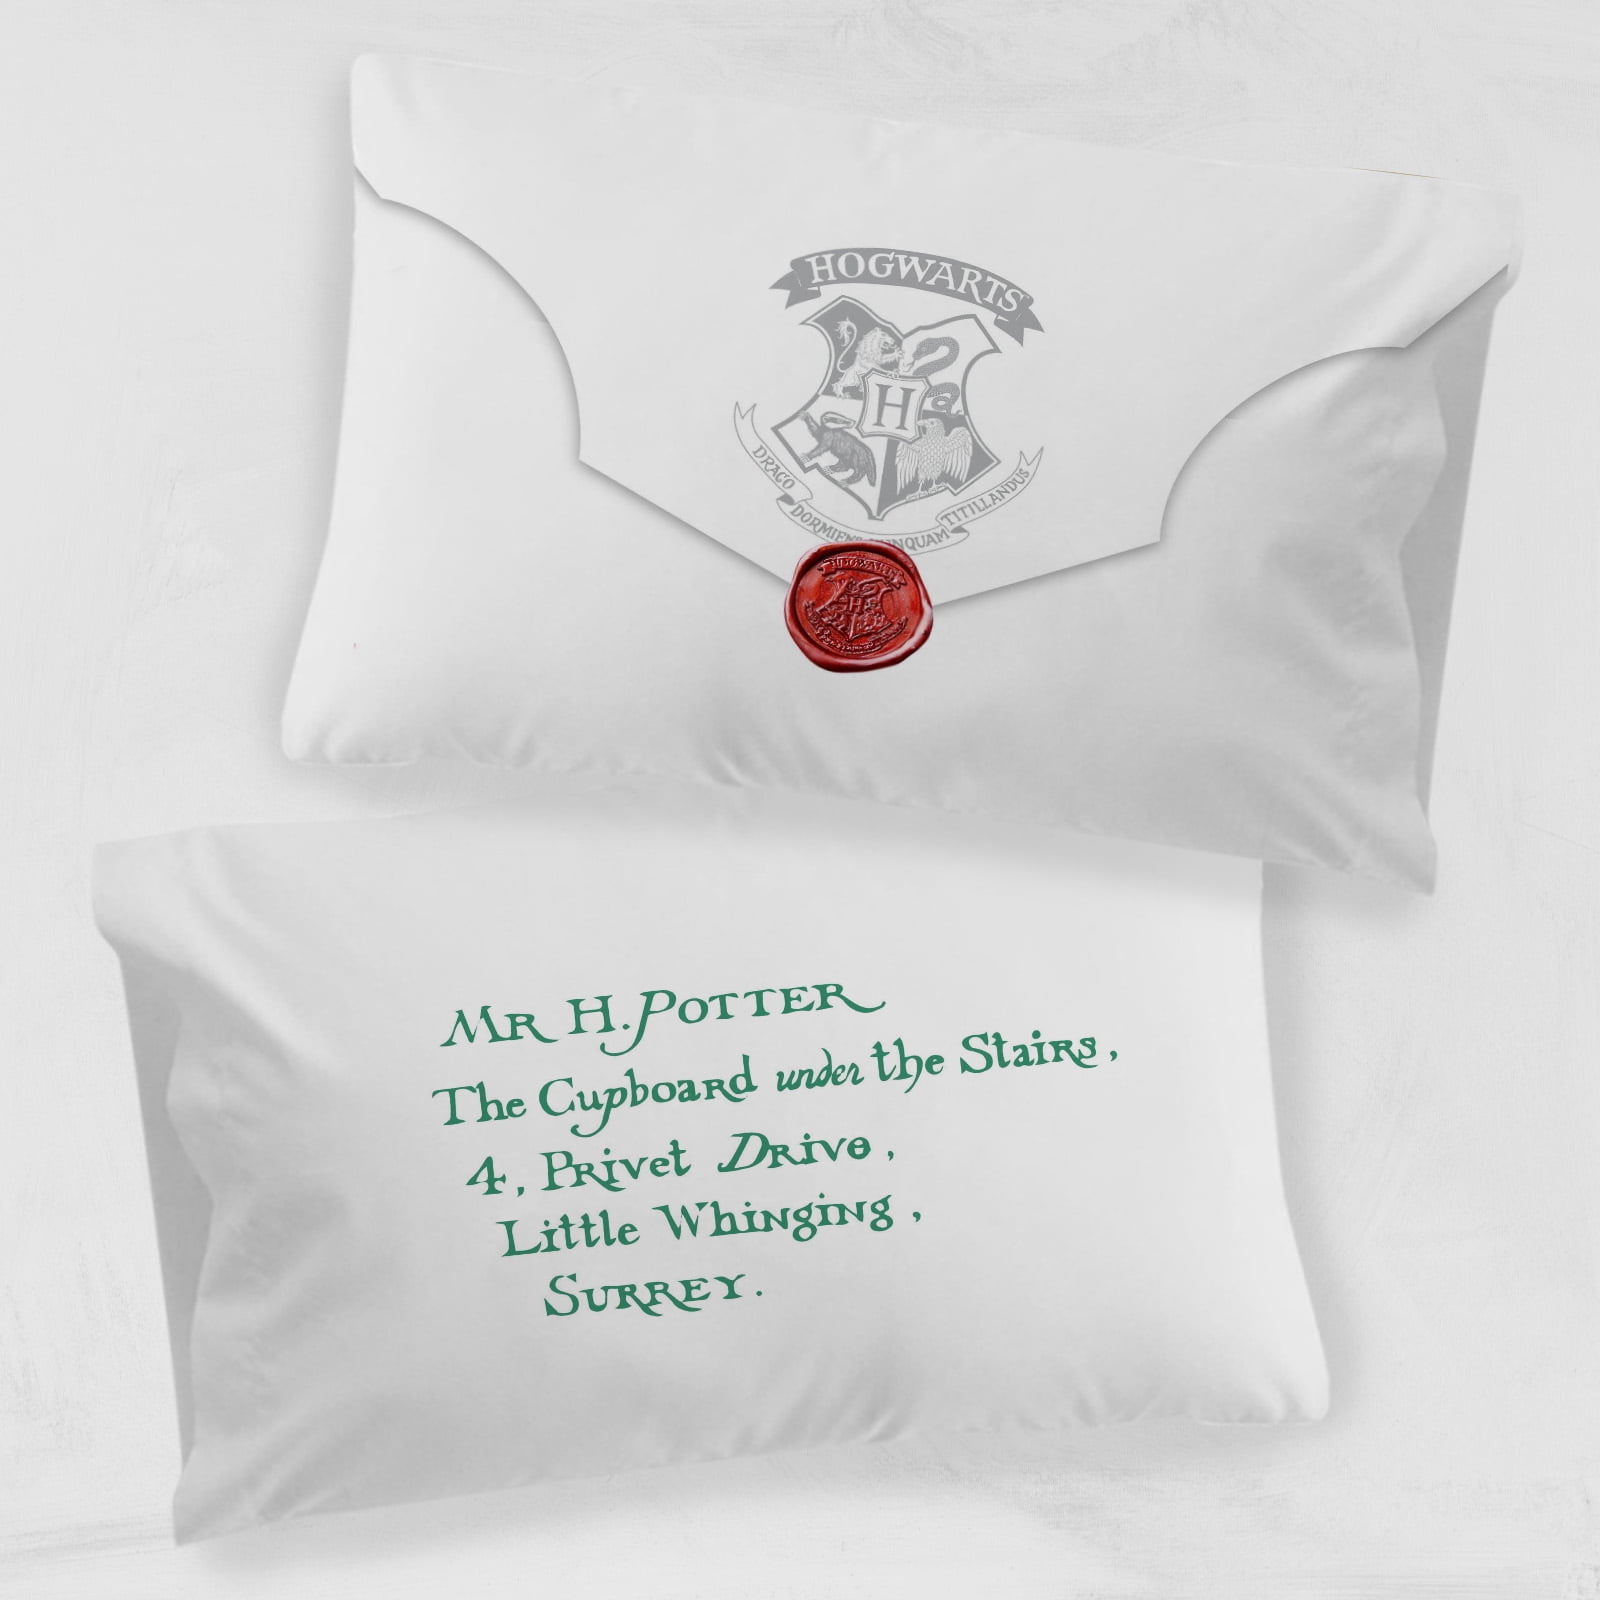 NEW and SEALED! Harry Potter Hogwarts is My Home PILLOWCASE SET 